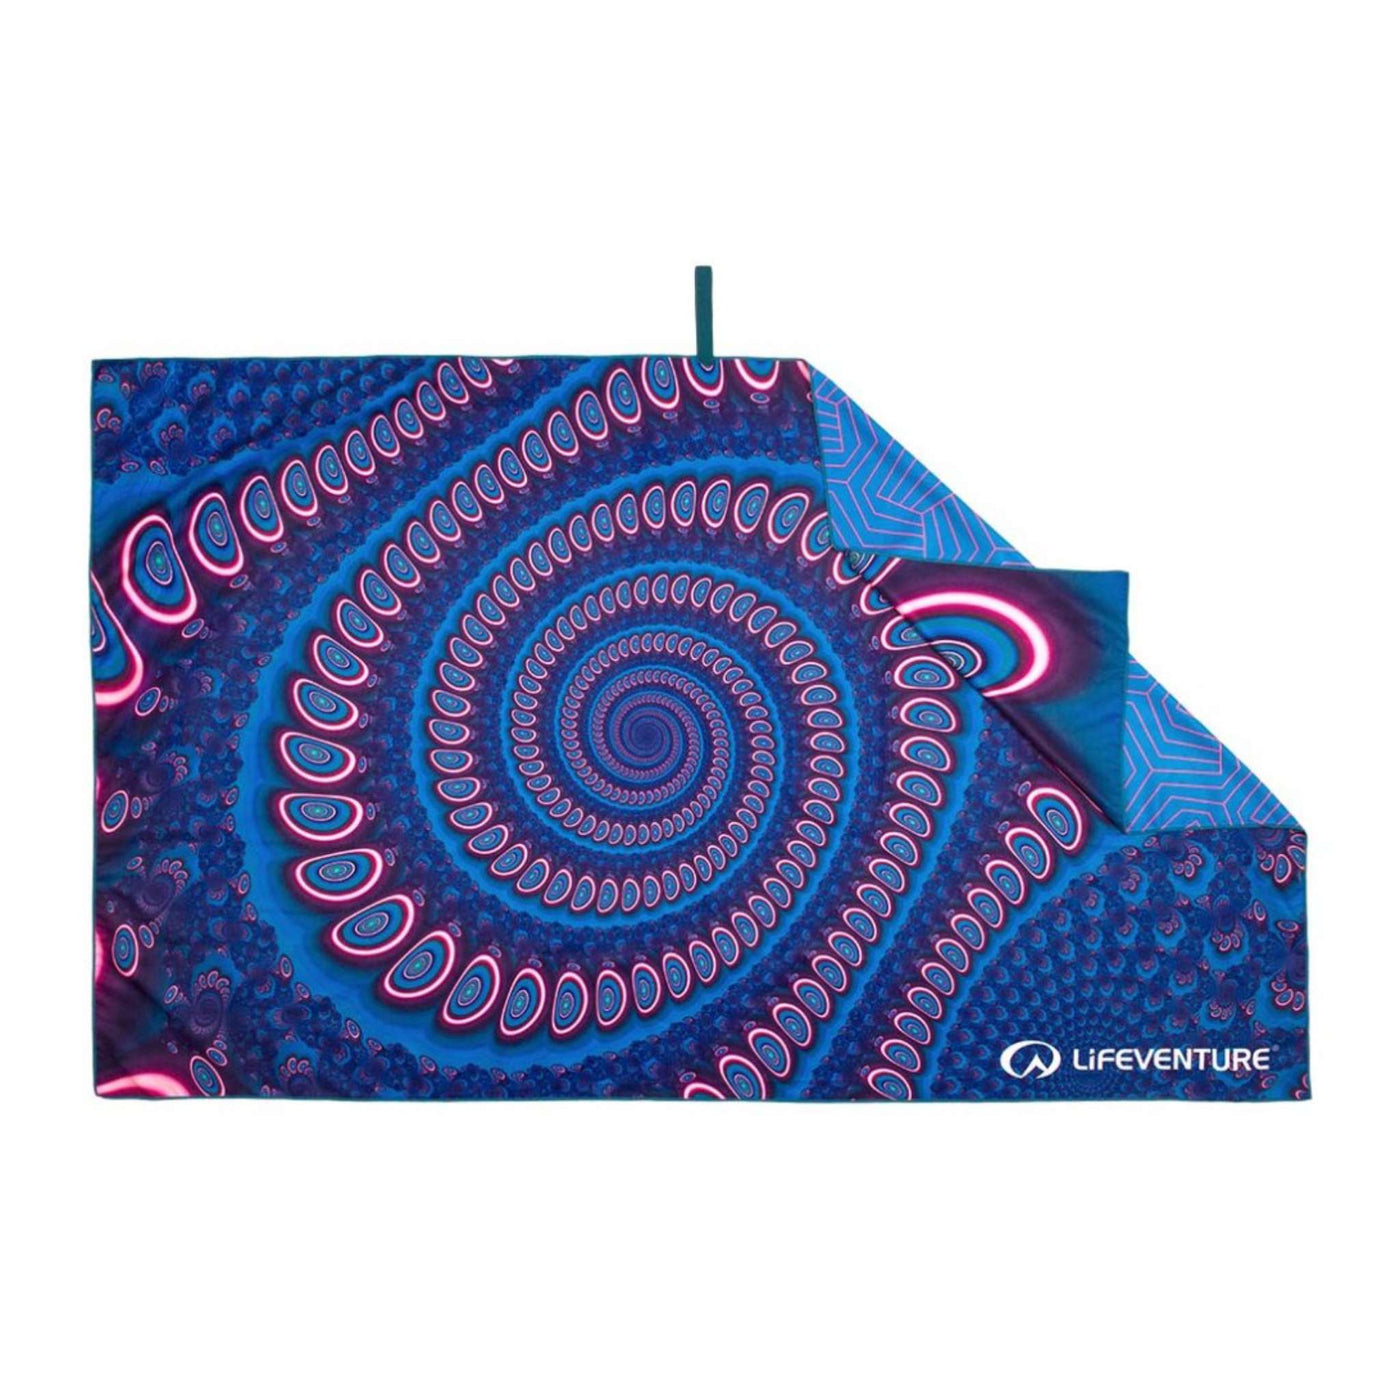 Lifeventure Recycled SoftFibre Printed Towels | Quickdry Travel Towel | Further Faster Christchurch NZ #andaman